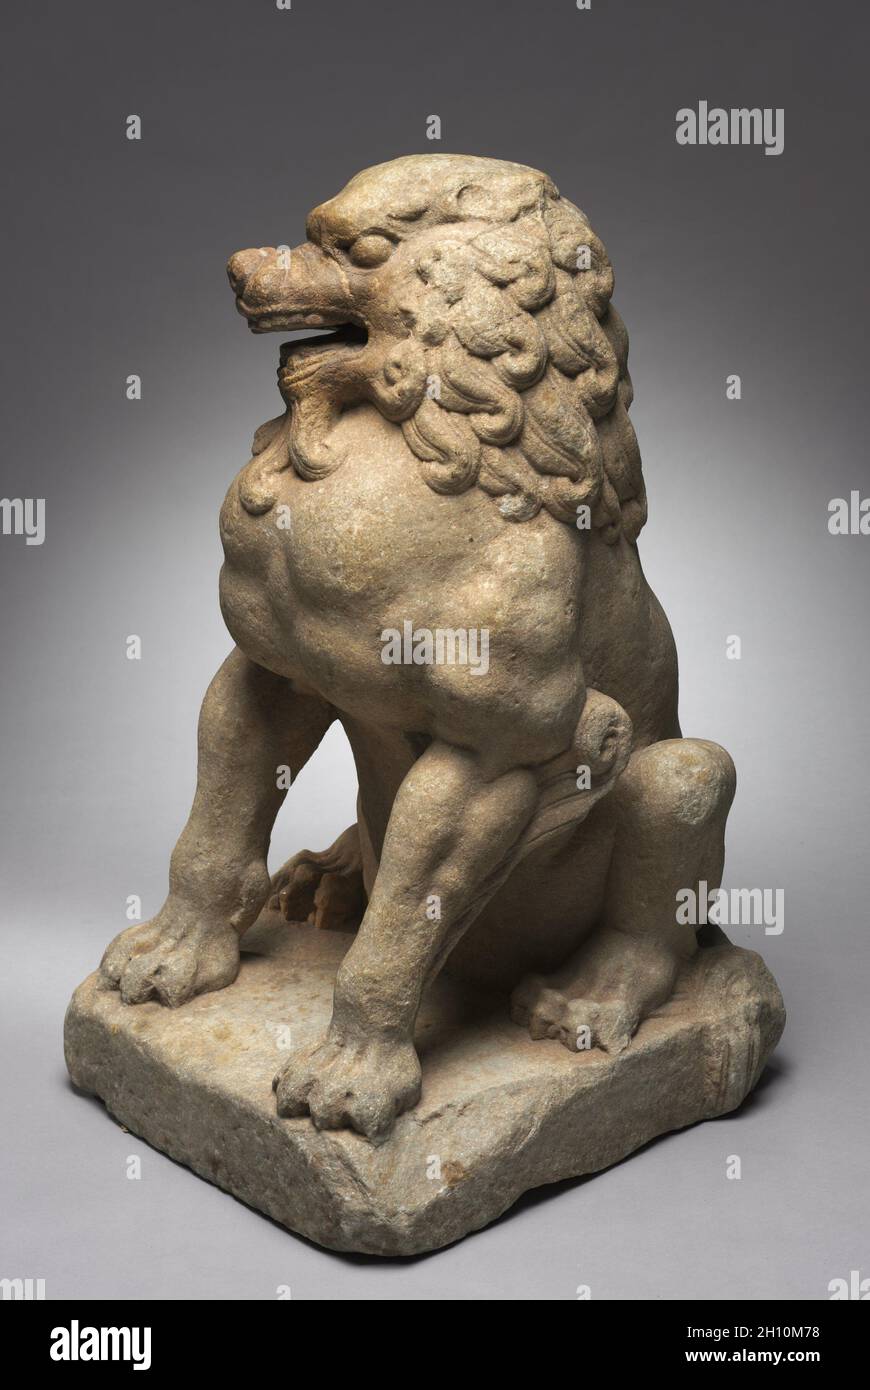 Guardian Lion, c. 600. China, Tang dynasty (618-907). White marble; overall: 78.8 cm (31 in.); base: 49.6 x 41.8 cm (19 1/2 x 16 7/16 in.). Stock Photo